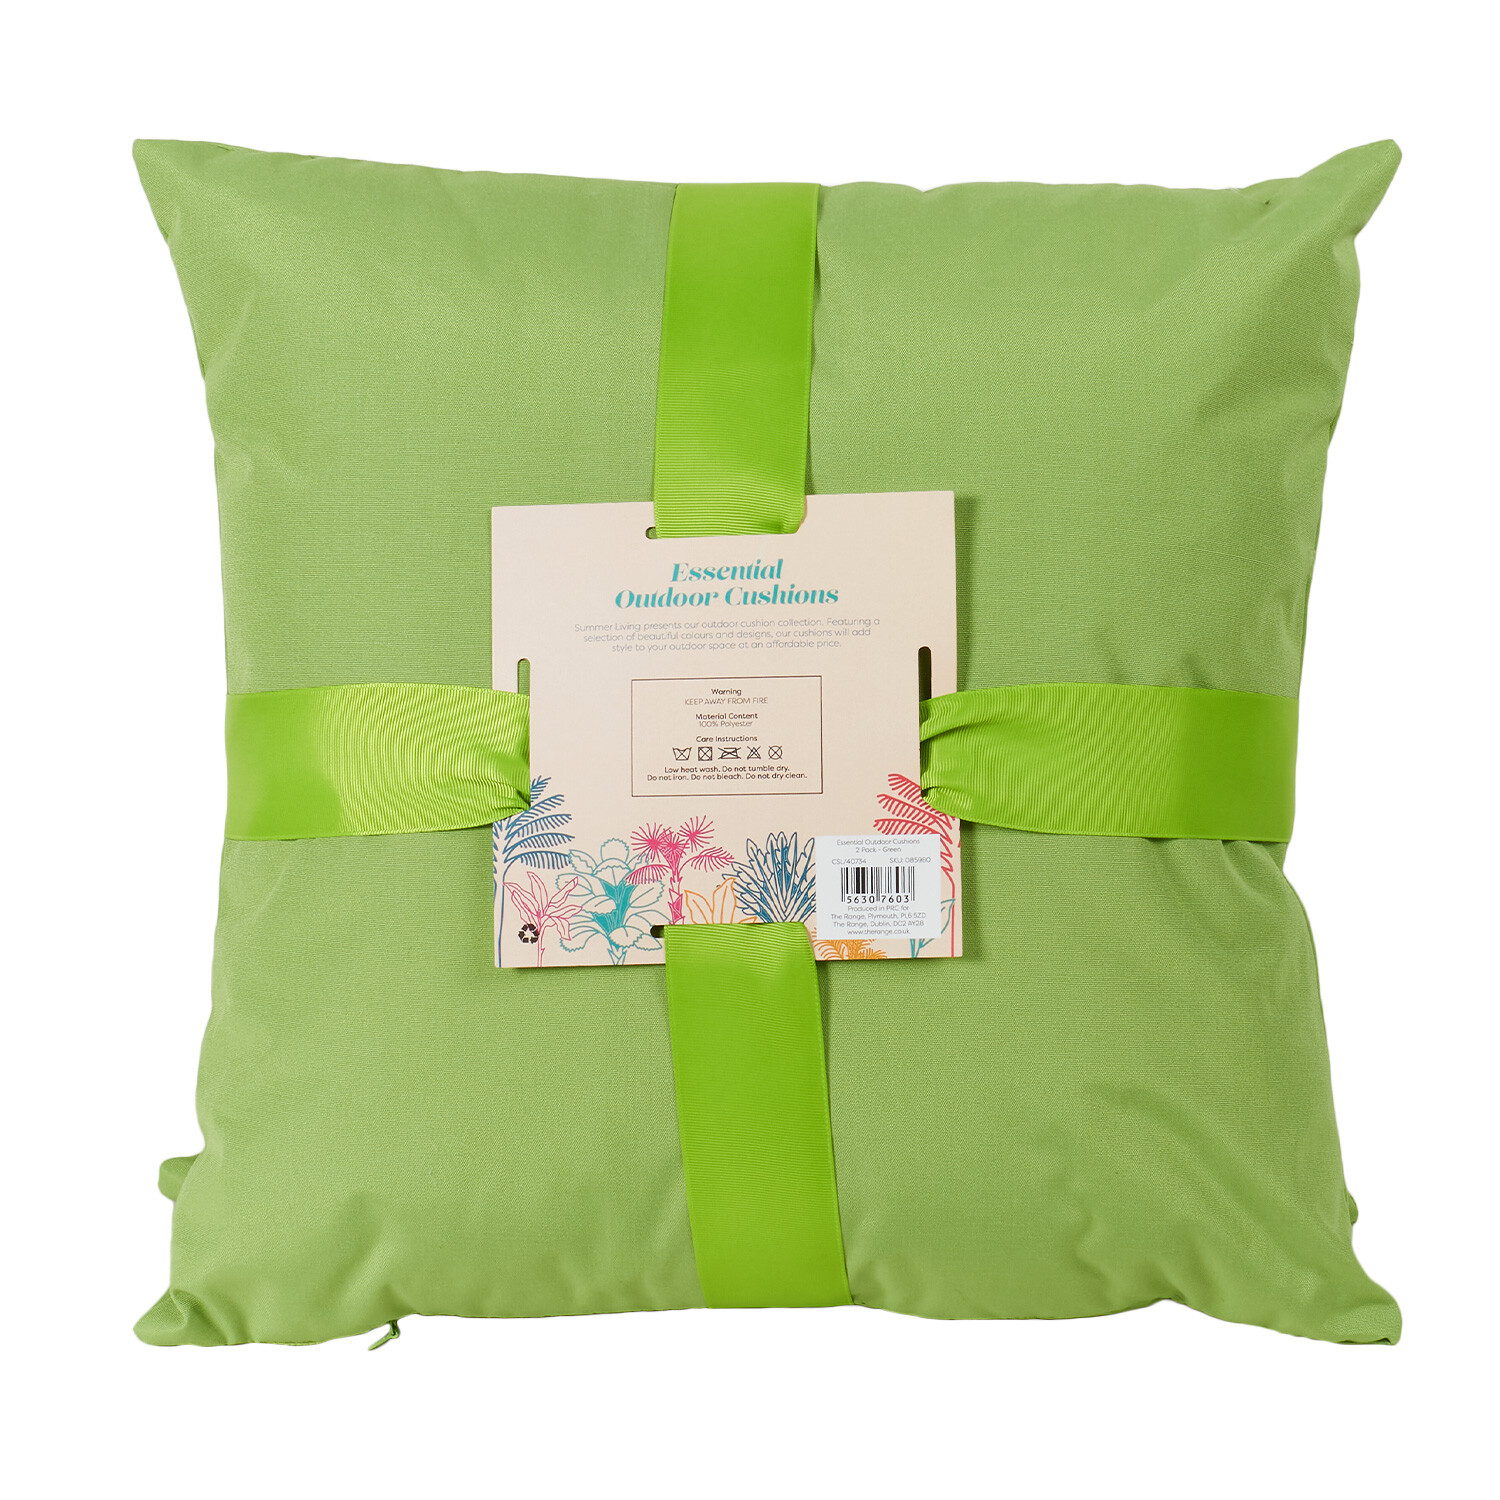 Essential Outdoor Cushions - Green Image 4